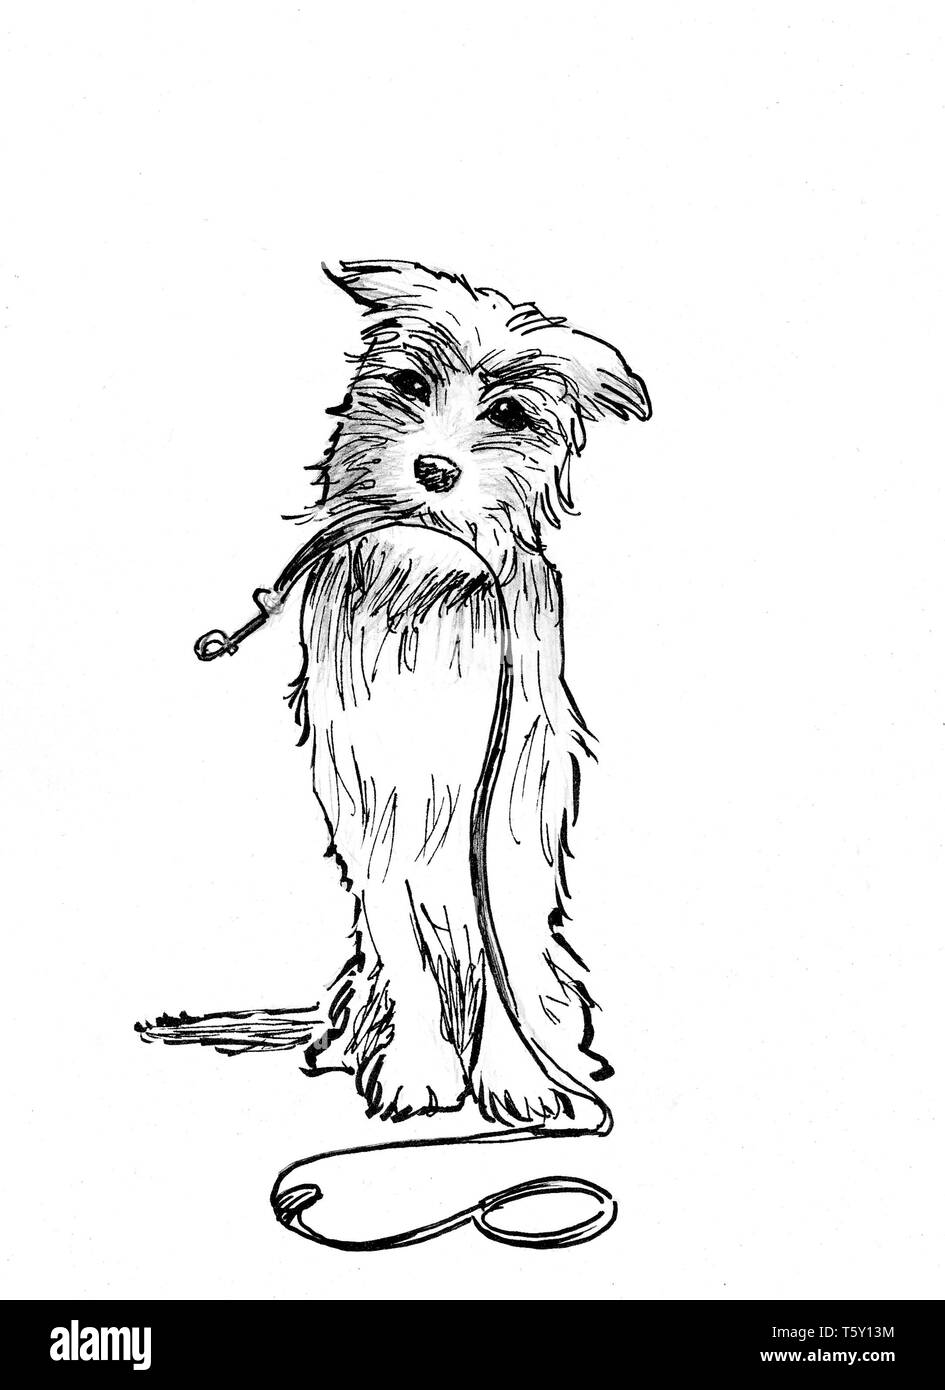 Ink drawing dog with dog leash in its mouth Stock Photo